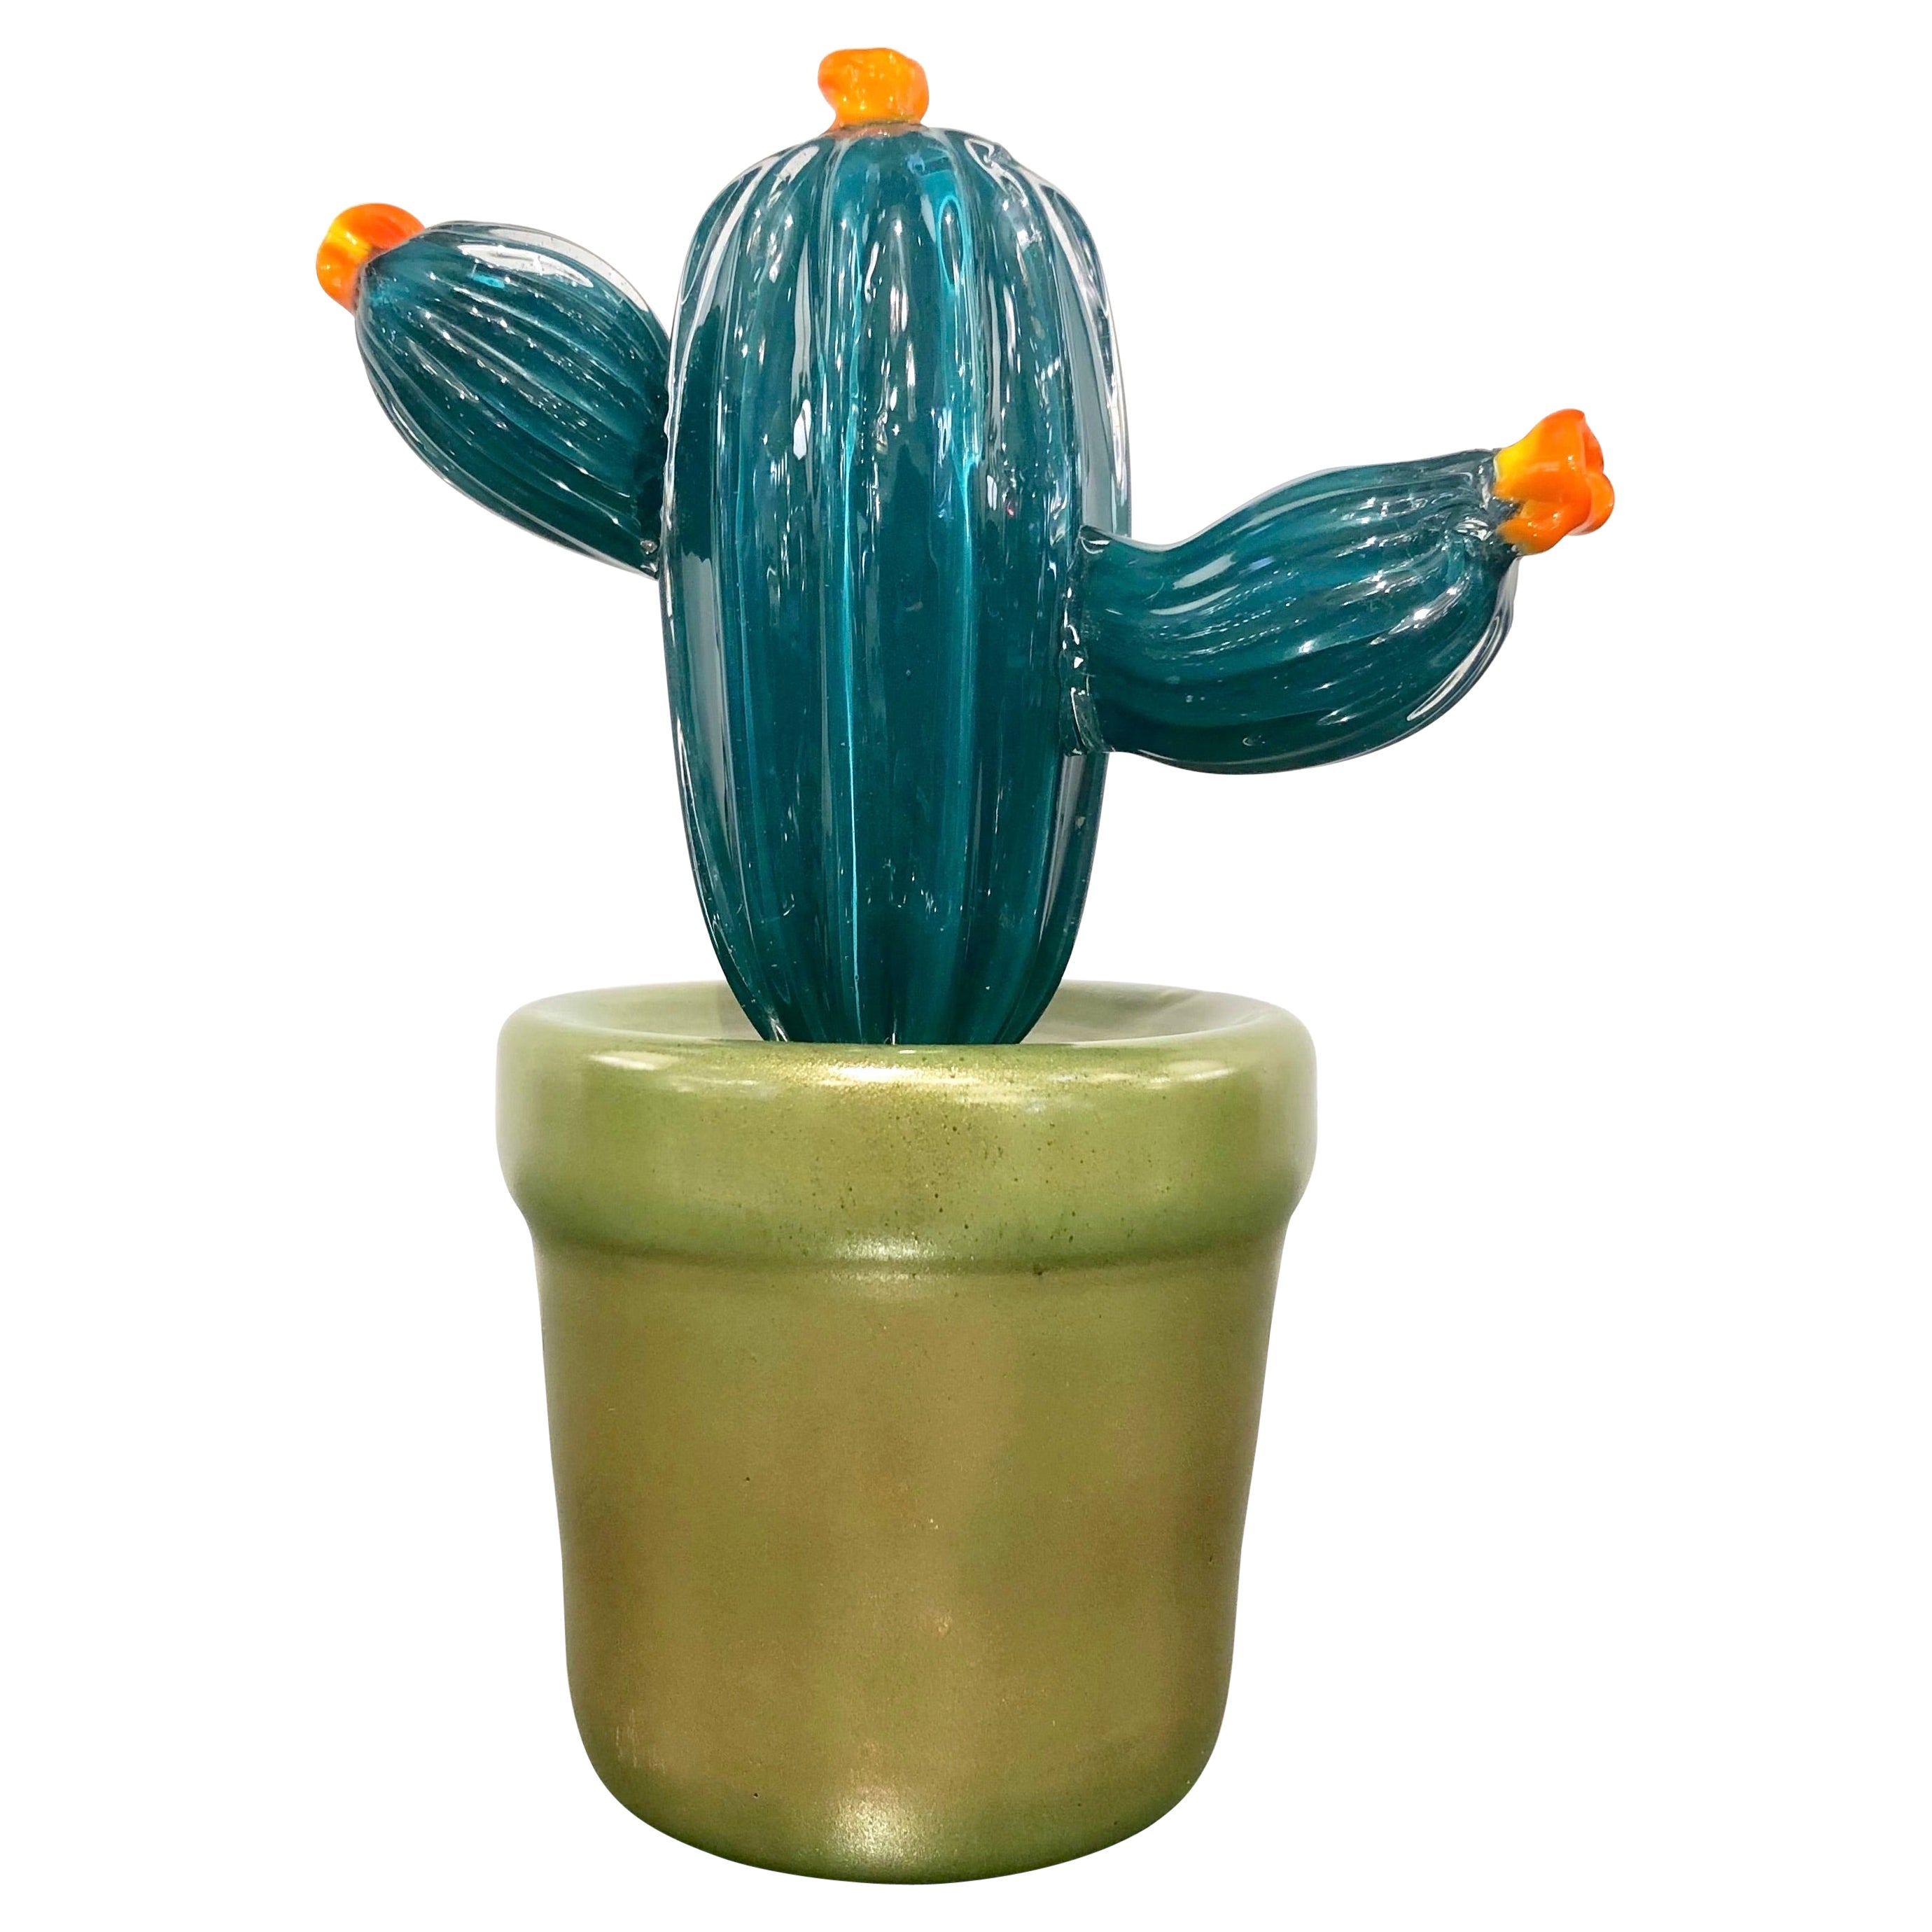 2000s Italian Teal Green Gold Murano Art Glass Cactus Plant with Orange Flowers For Sale